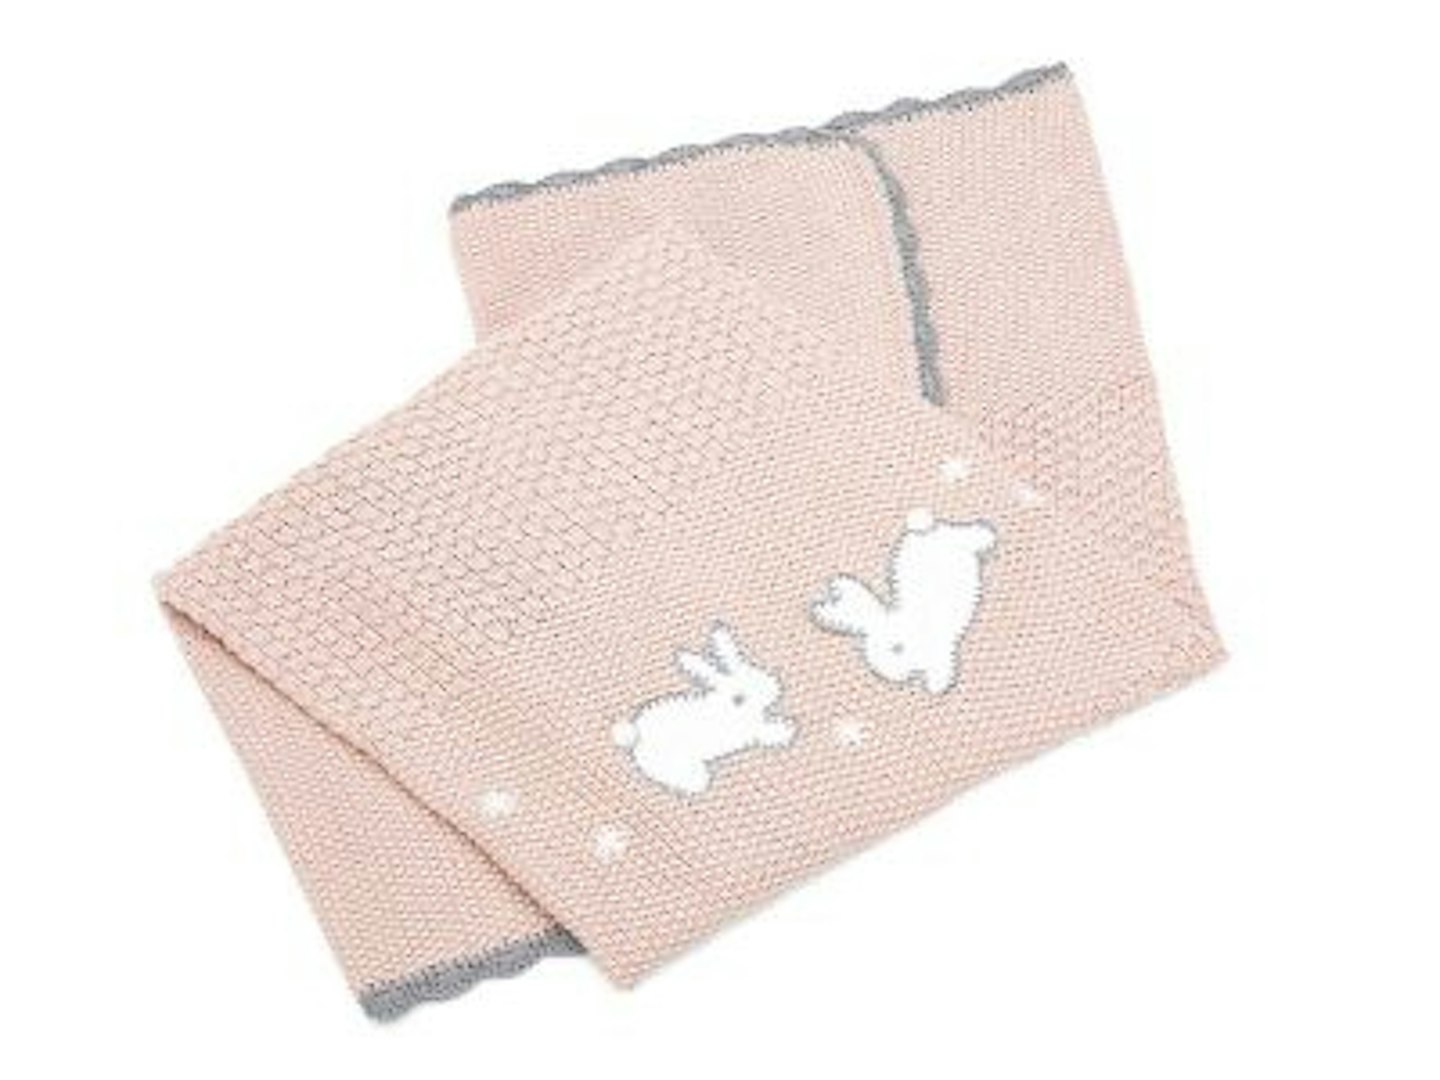 Mamas & Papas Knitted Blanket - Welcome to the world - Pink, 29, Mothercare